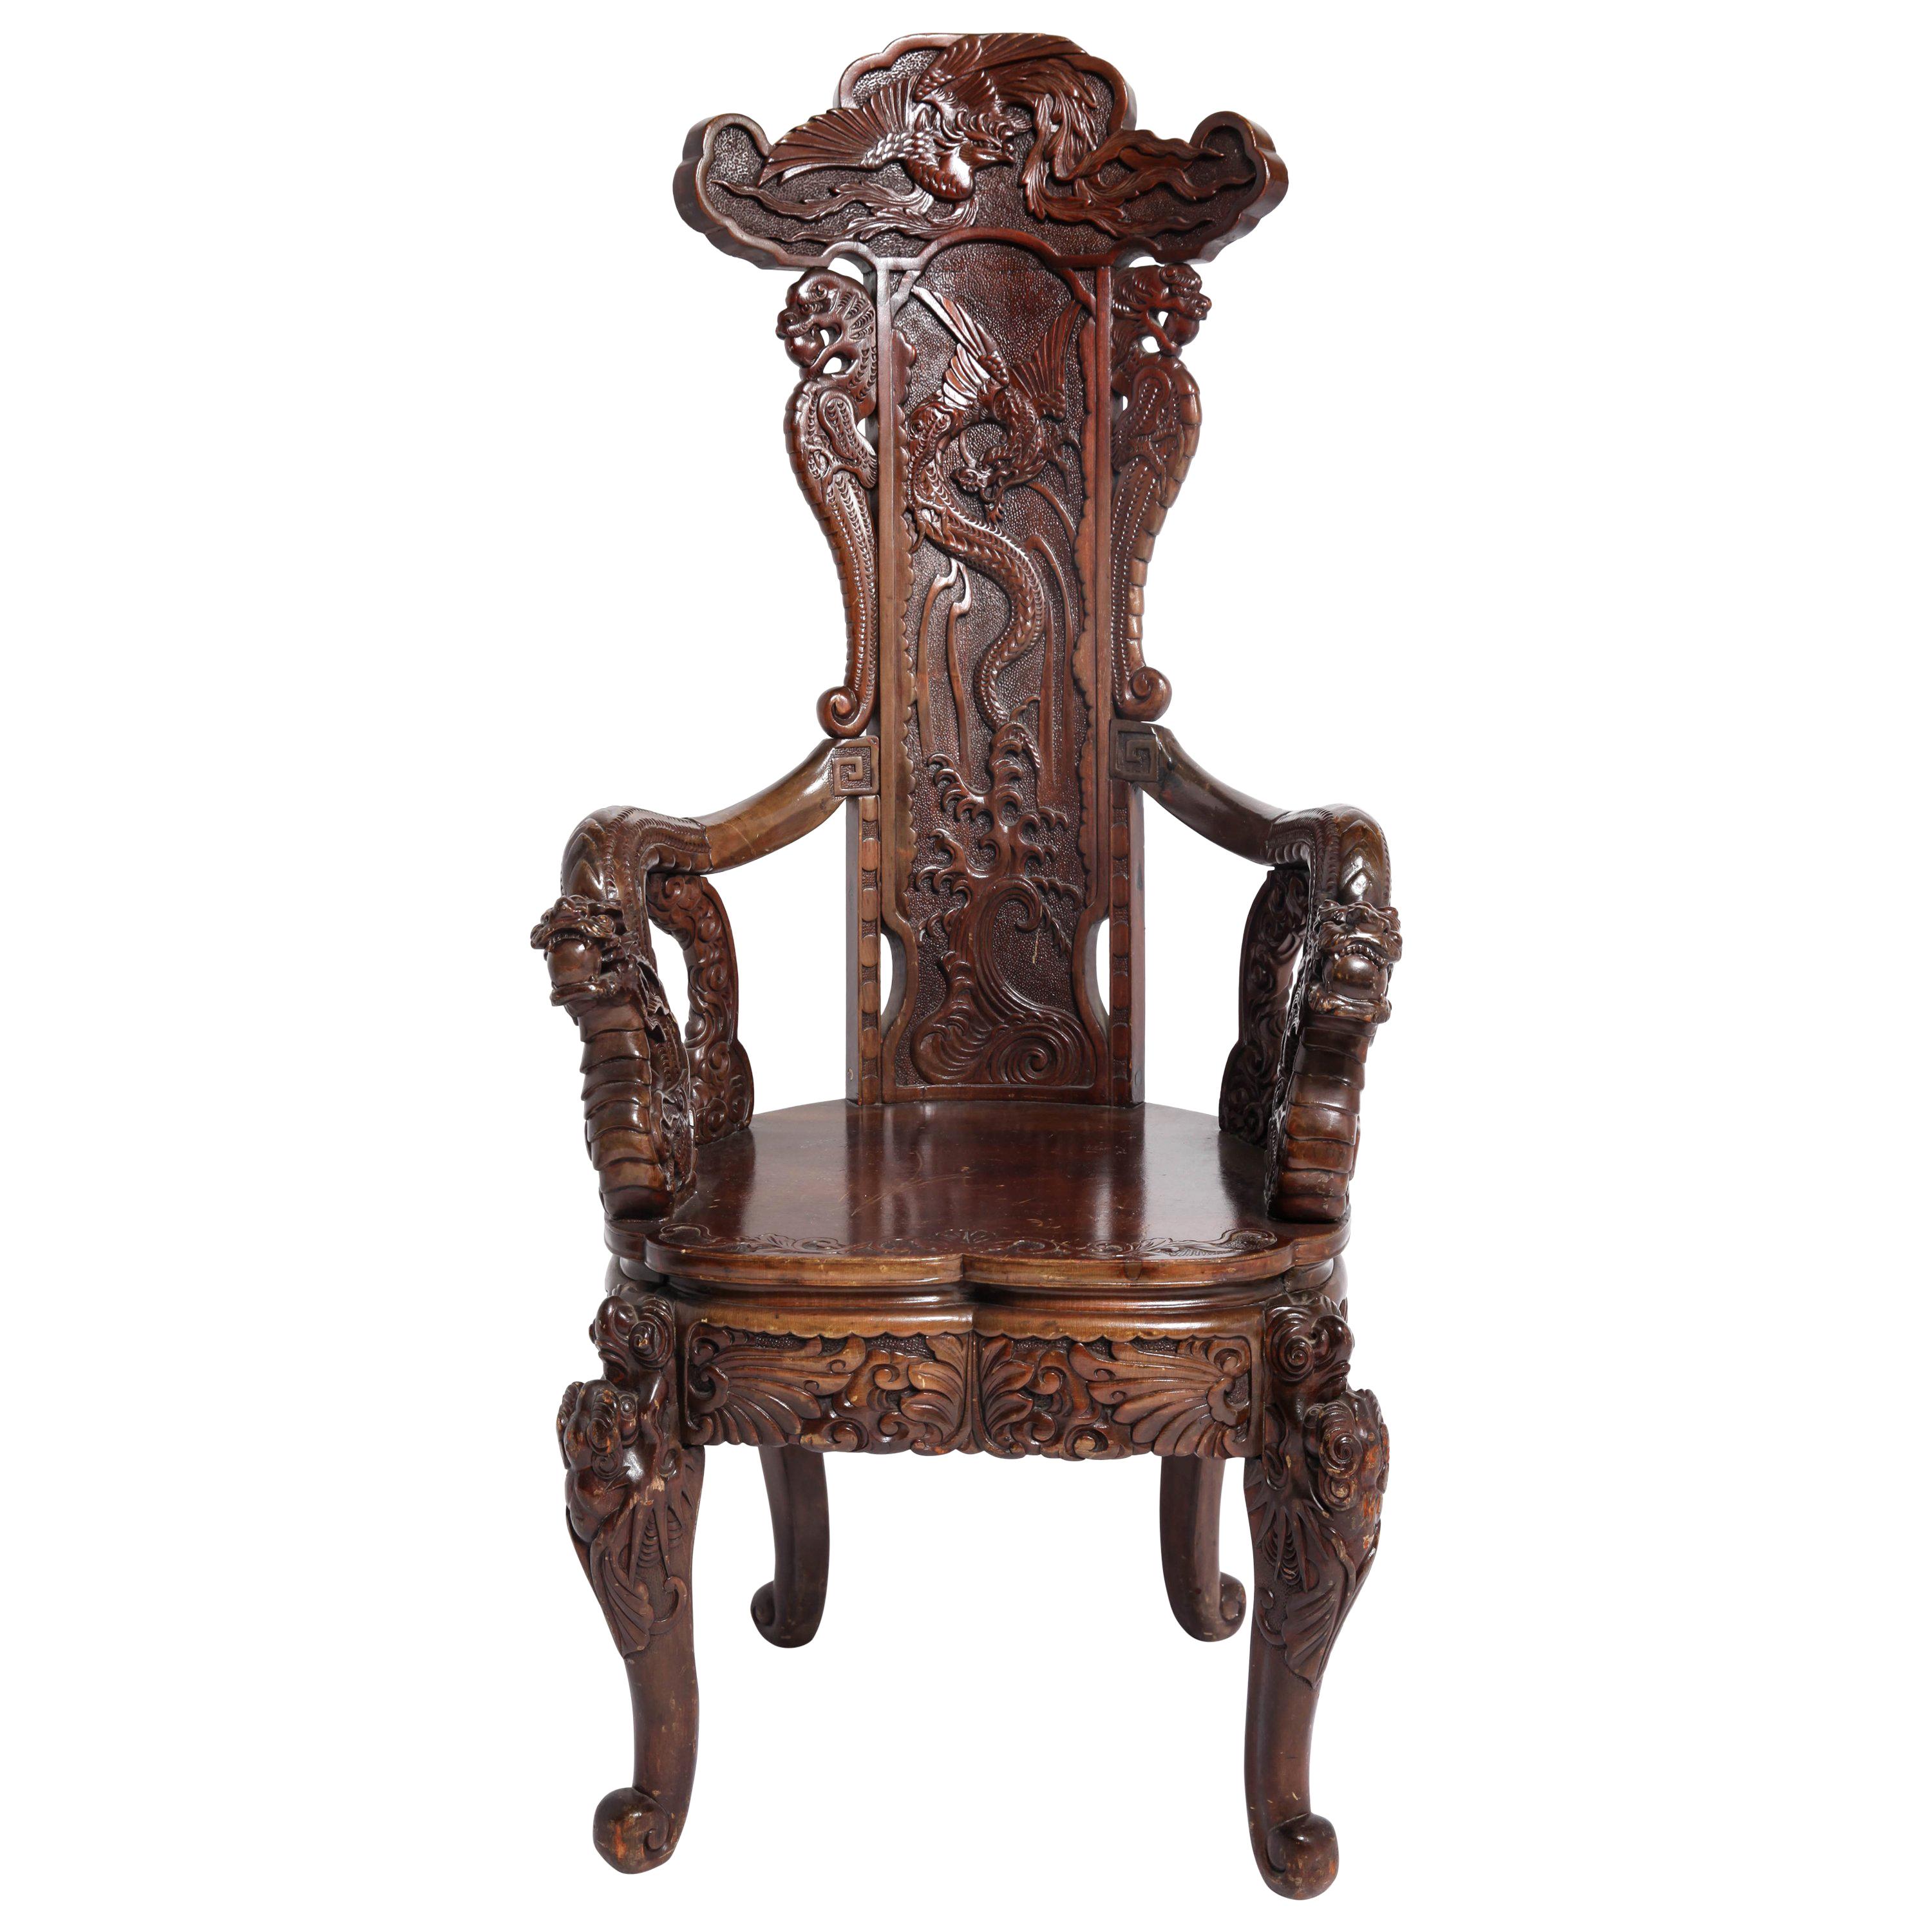 Art Nouveau Style Japanese High-Back Dragon and Phoenix Armchair in Carved Wood